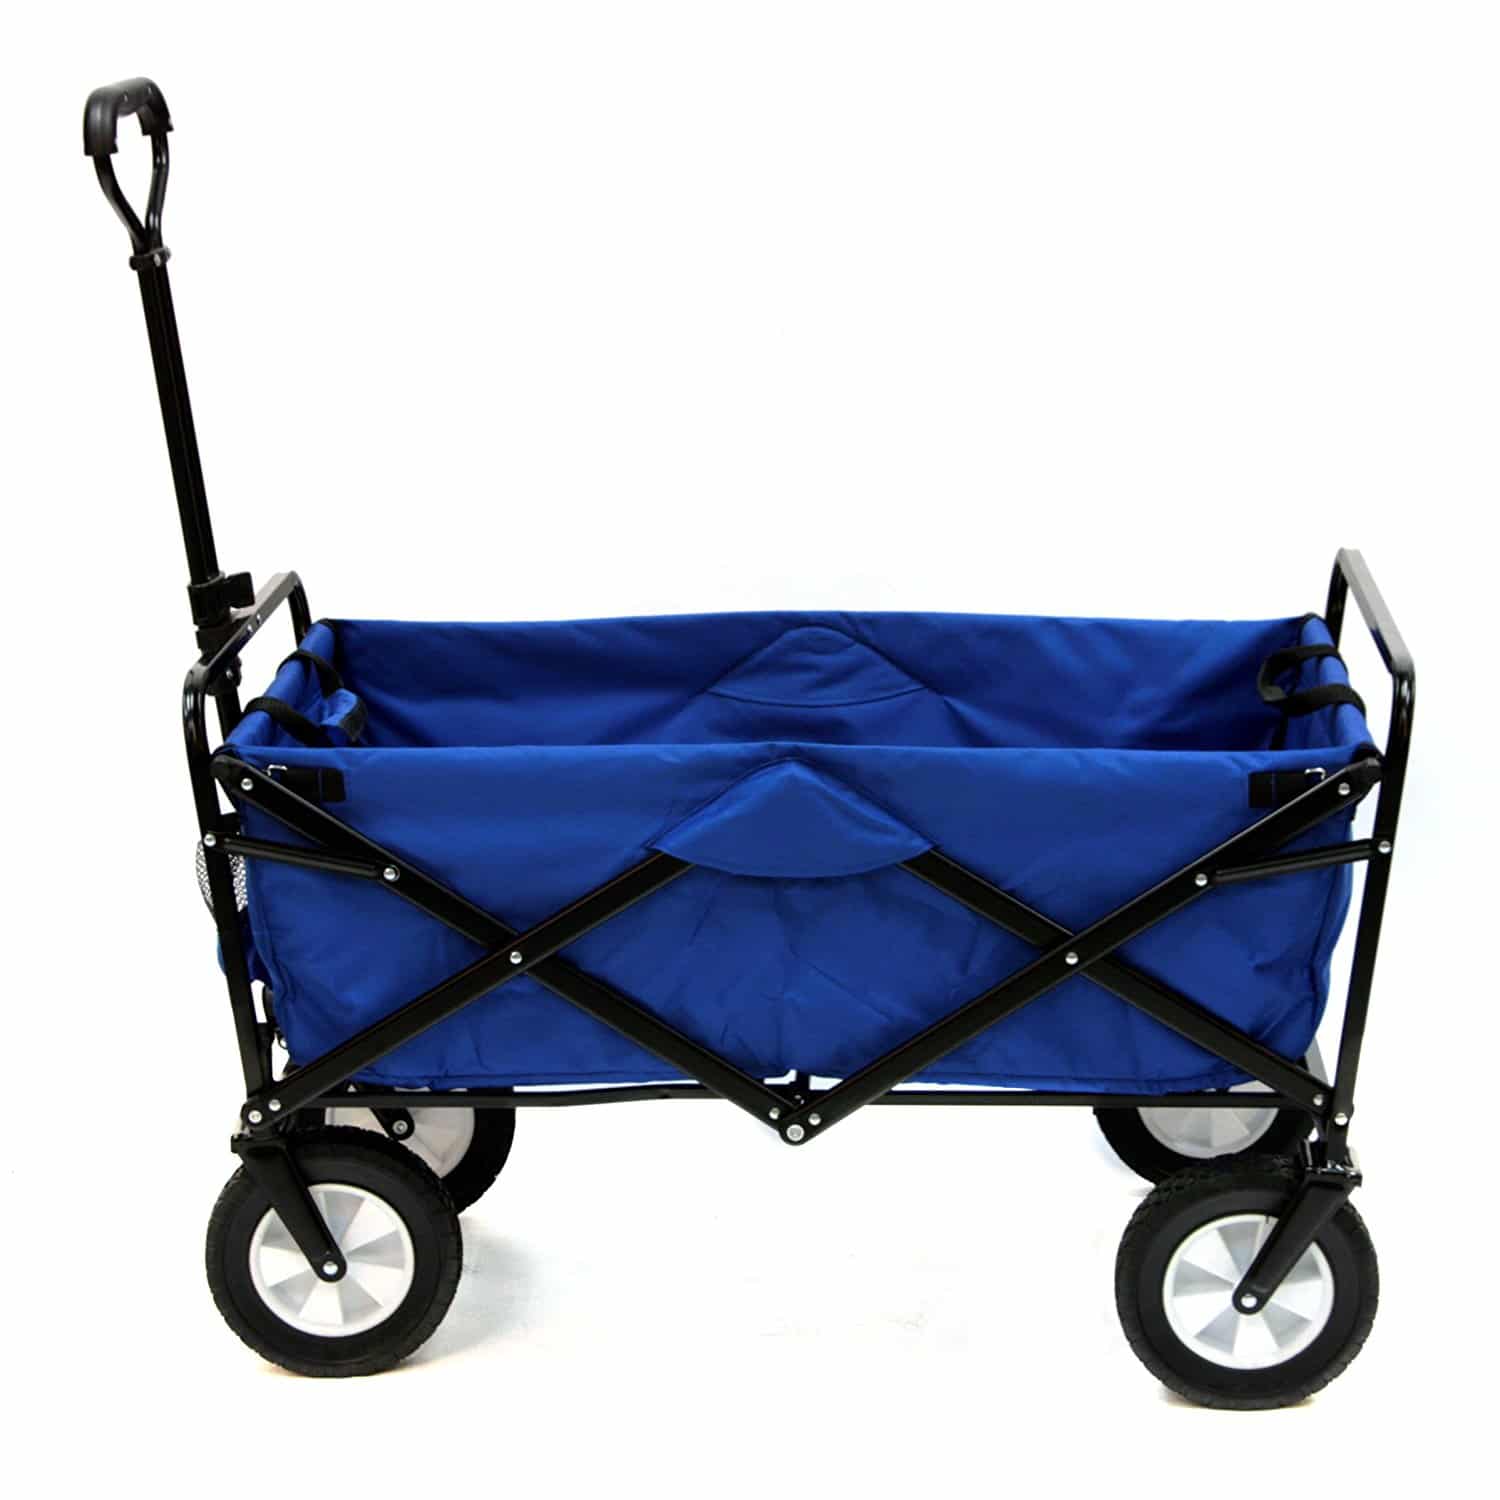 9. Mac Sports Collapsible Wagon Blue 